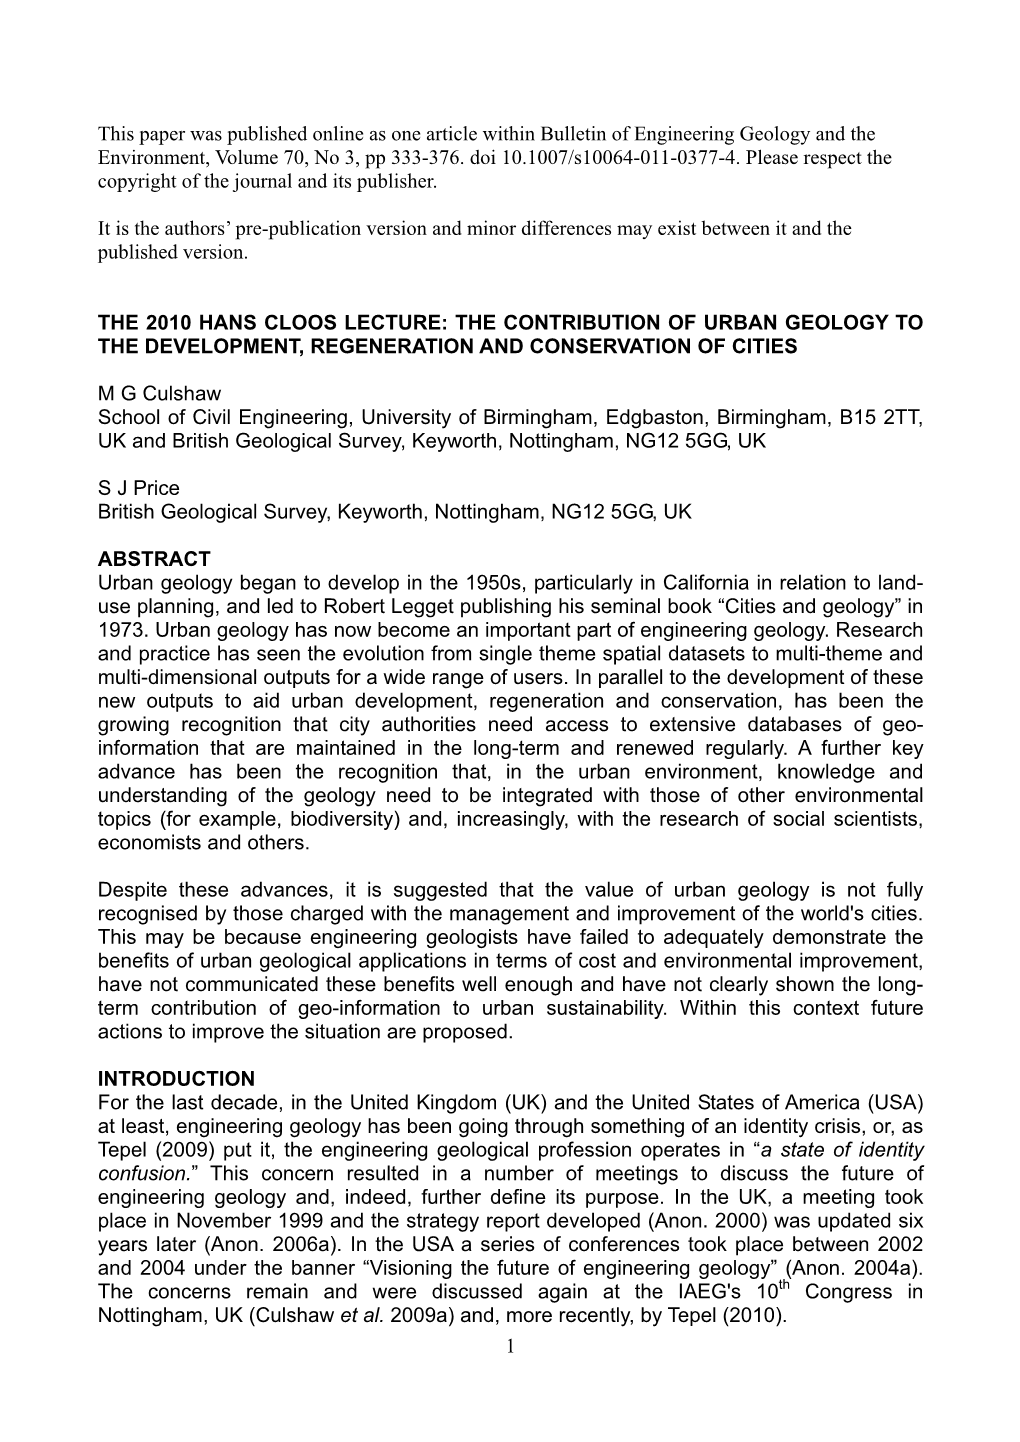 1 This Paper Was Published Online As One Article Within Bulletin of Engineering Geology and the Environment, Volume 70, No 3, Pp